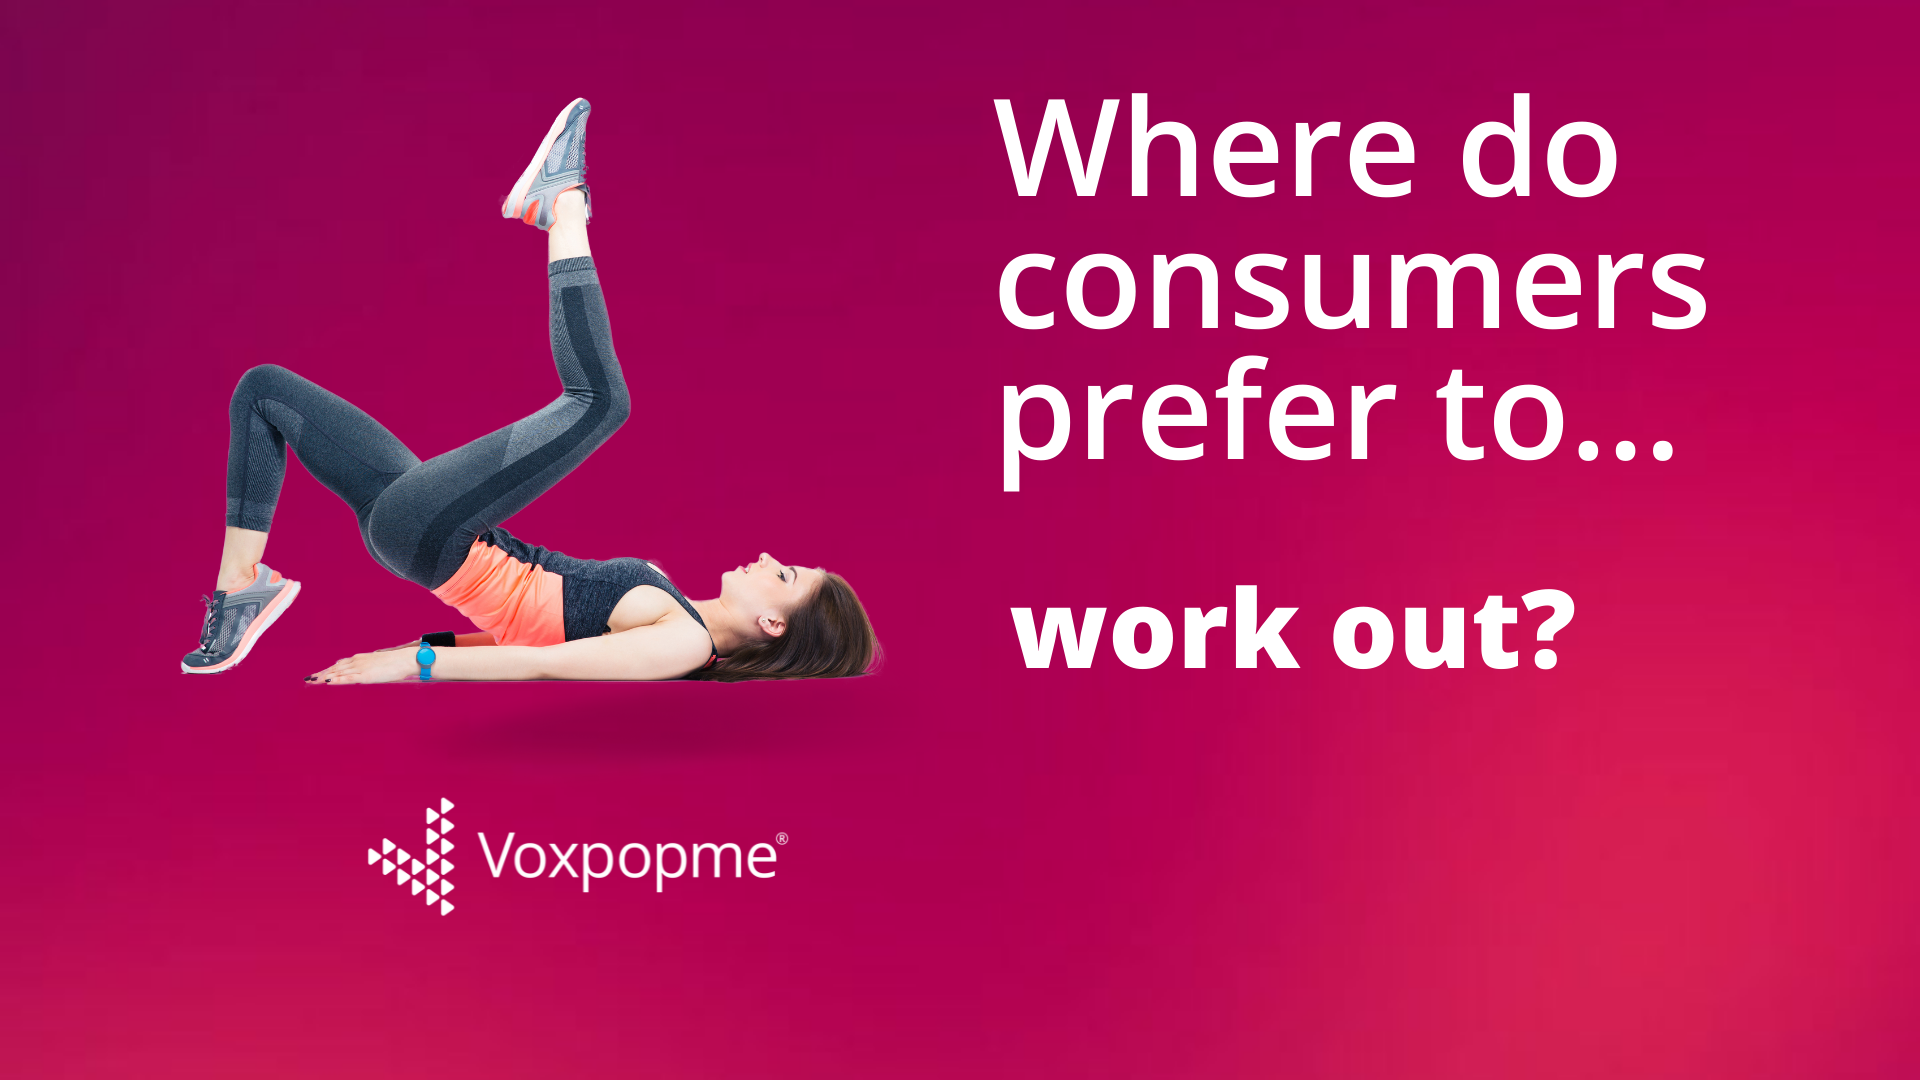 Home workouts vs. gym - what do consumers prefer now?